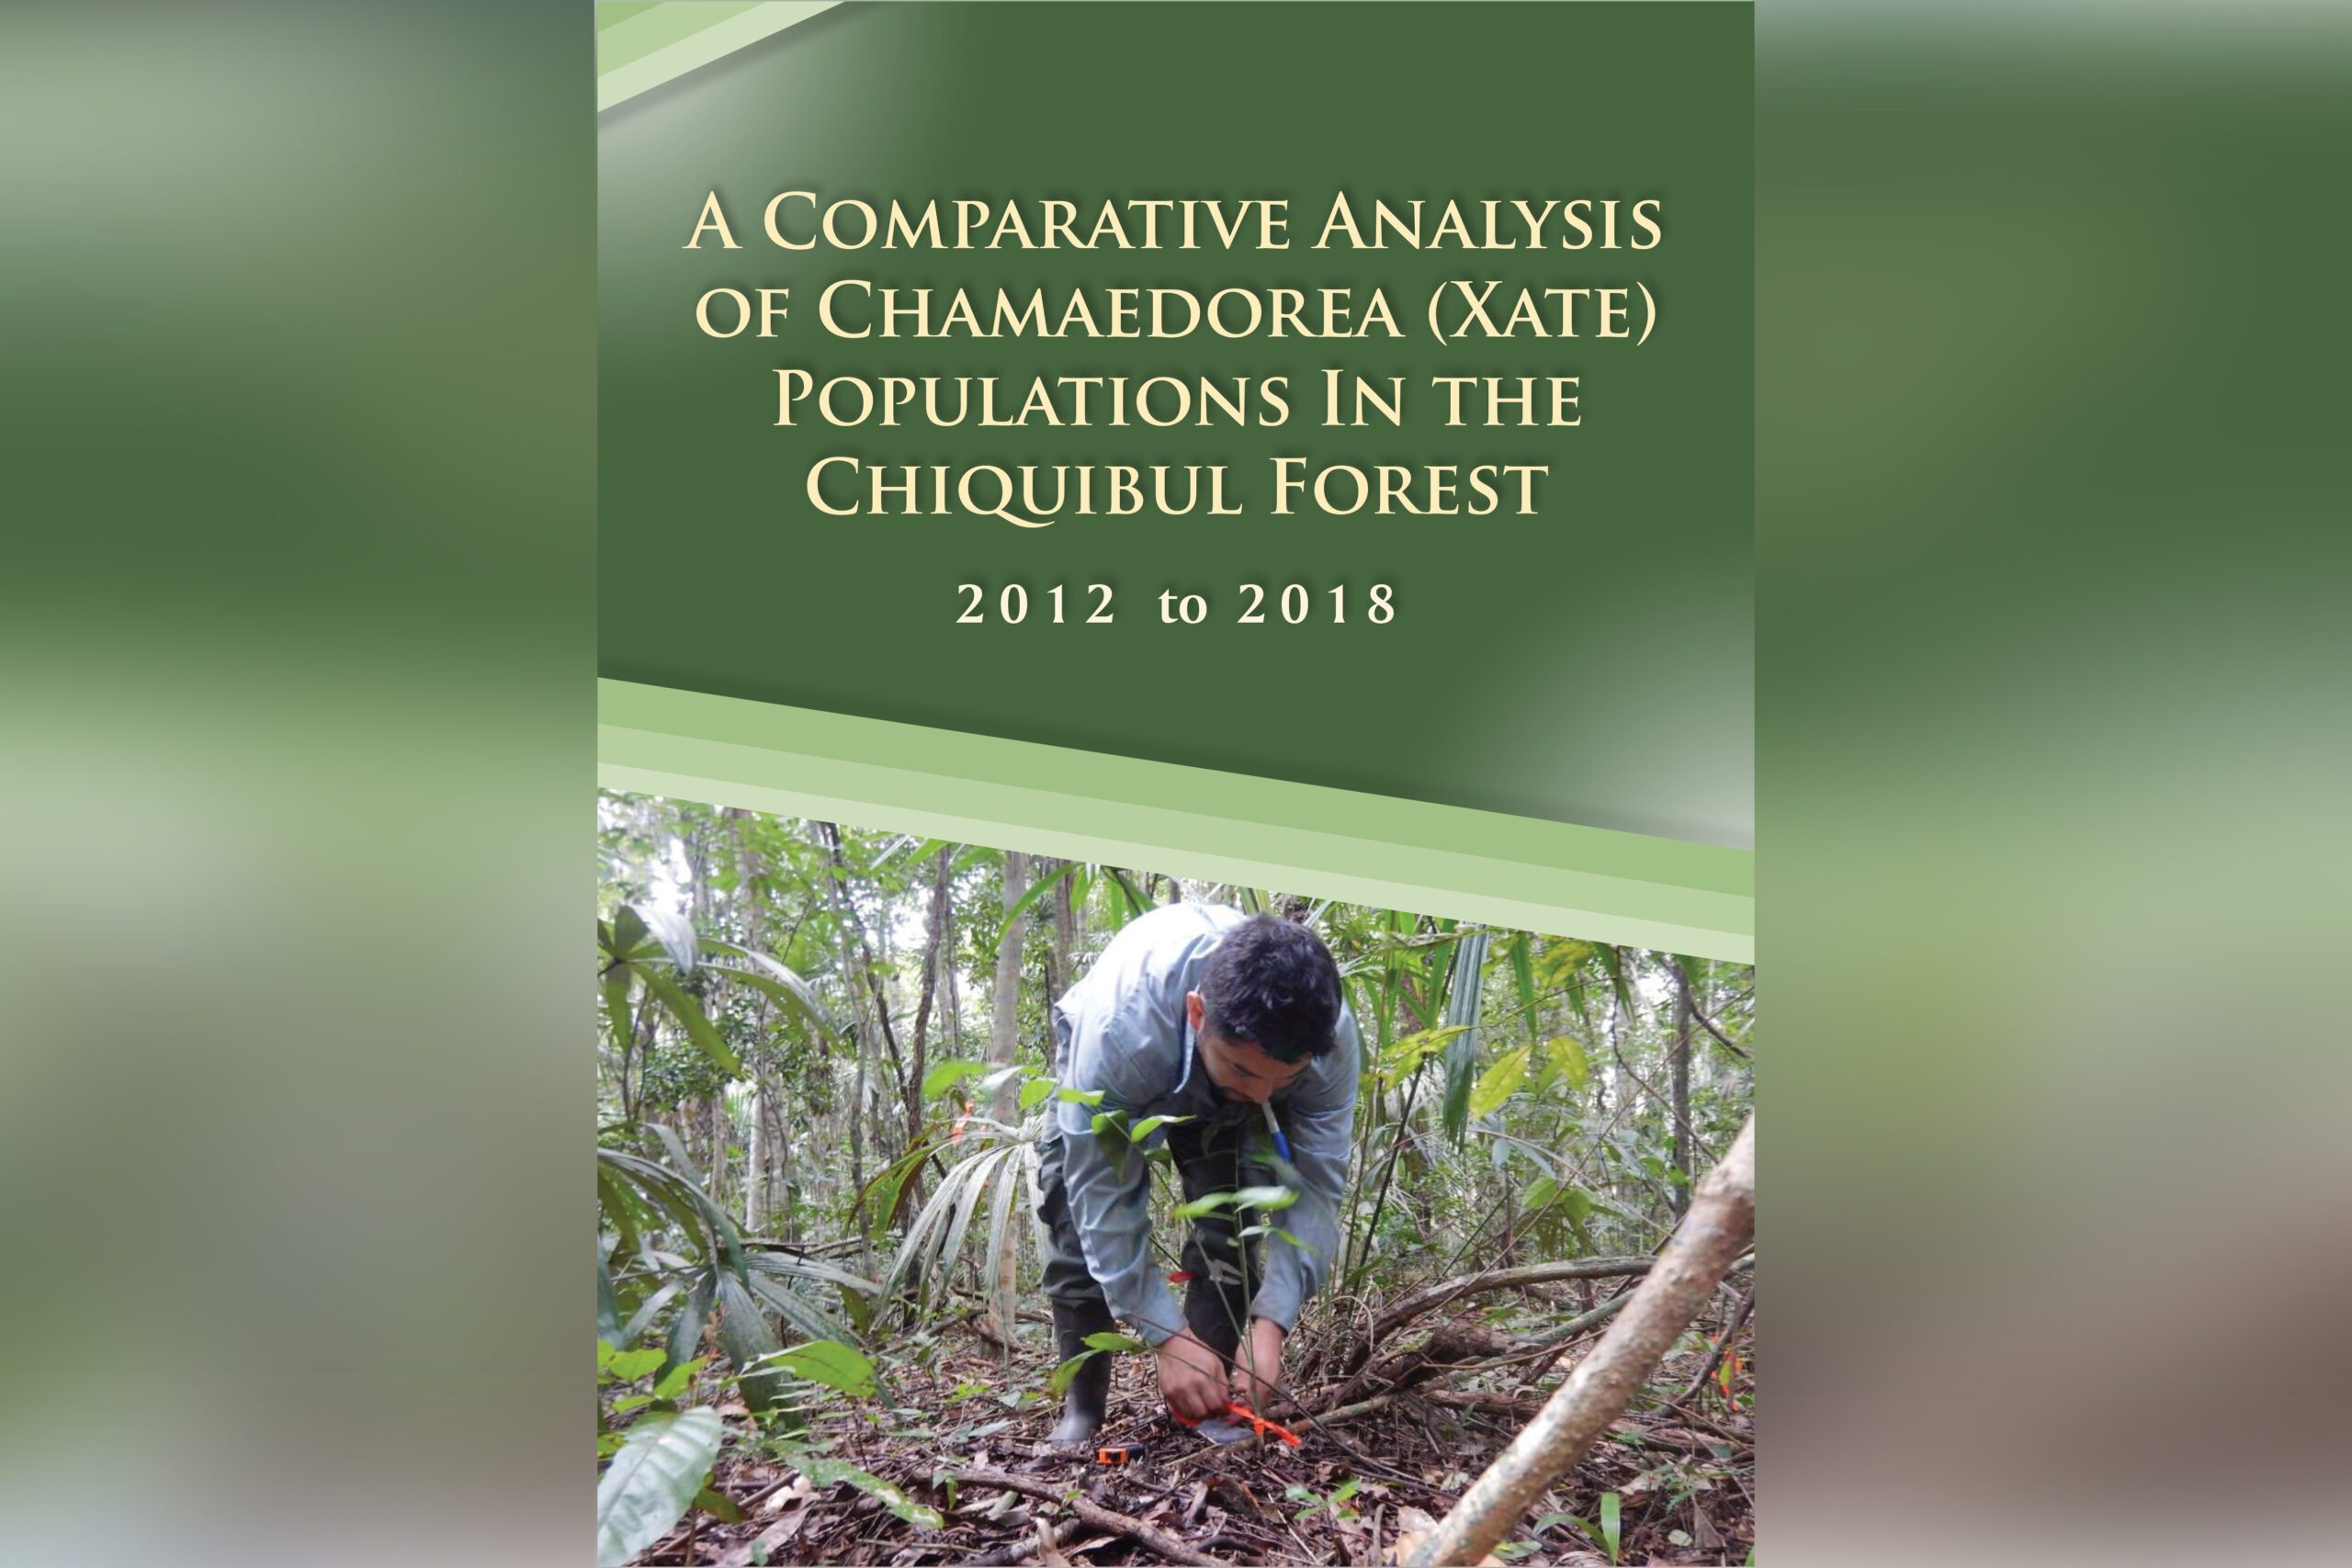 A Comparative Analysis of Chamaedorea (Xate) Populations In the Chiquibul Forest 2012 to 2018